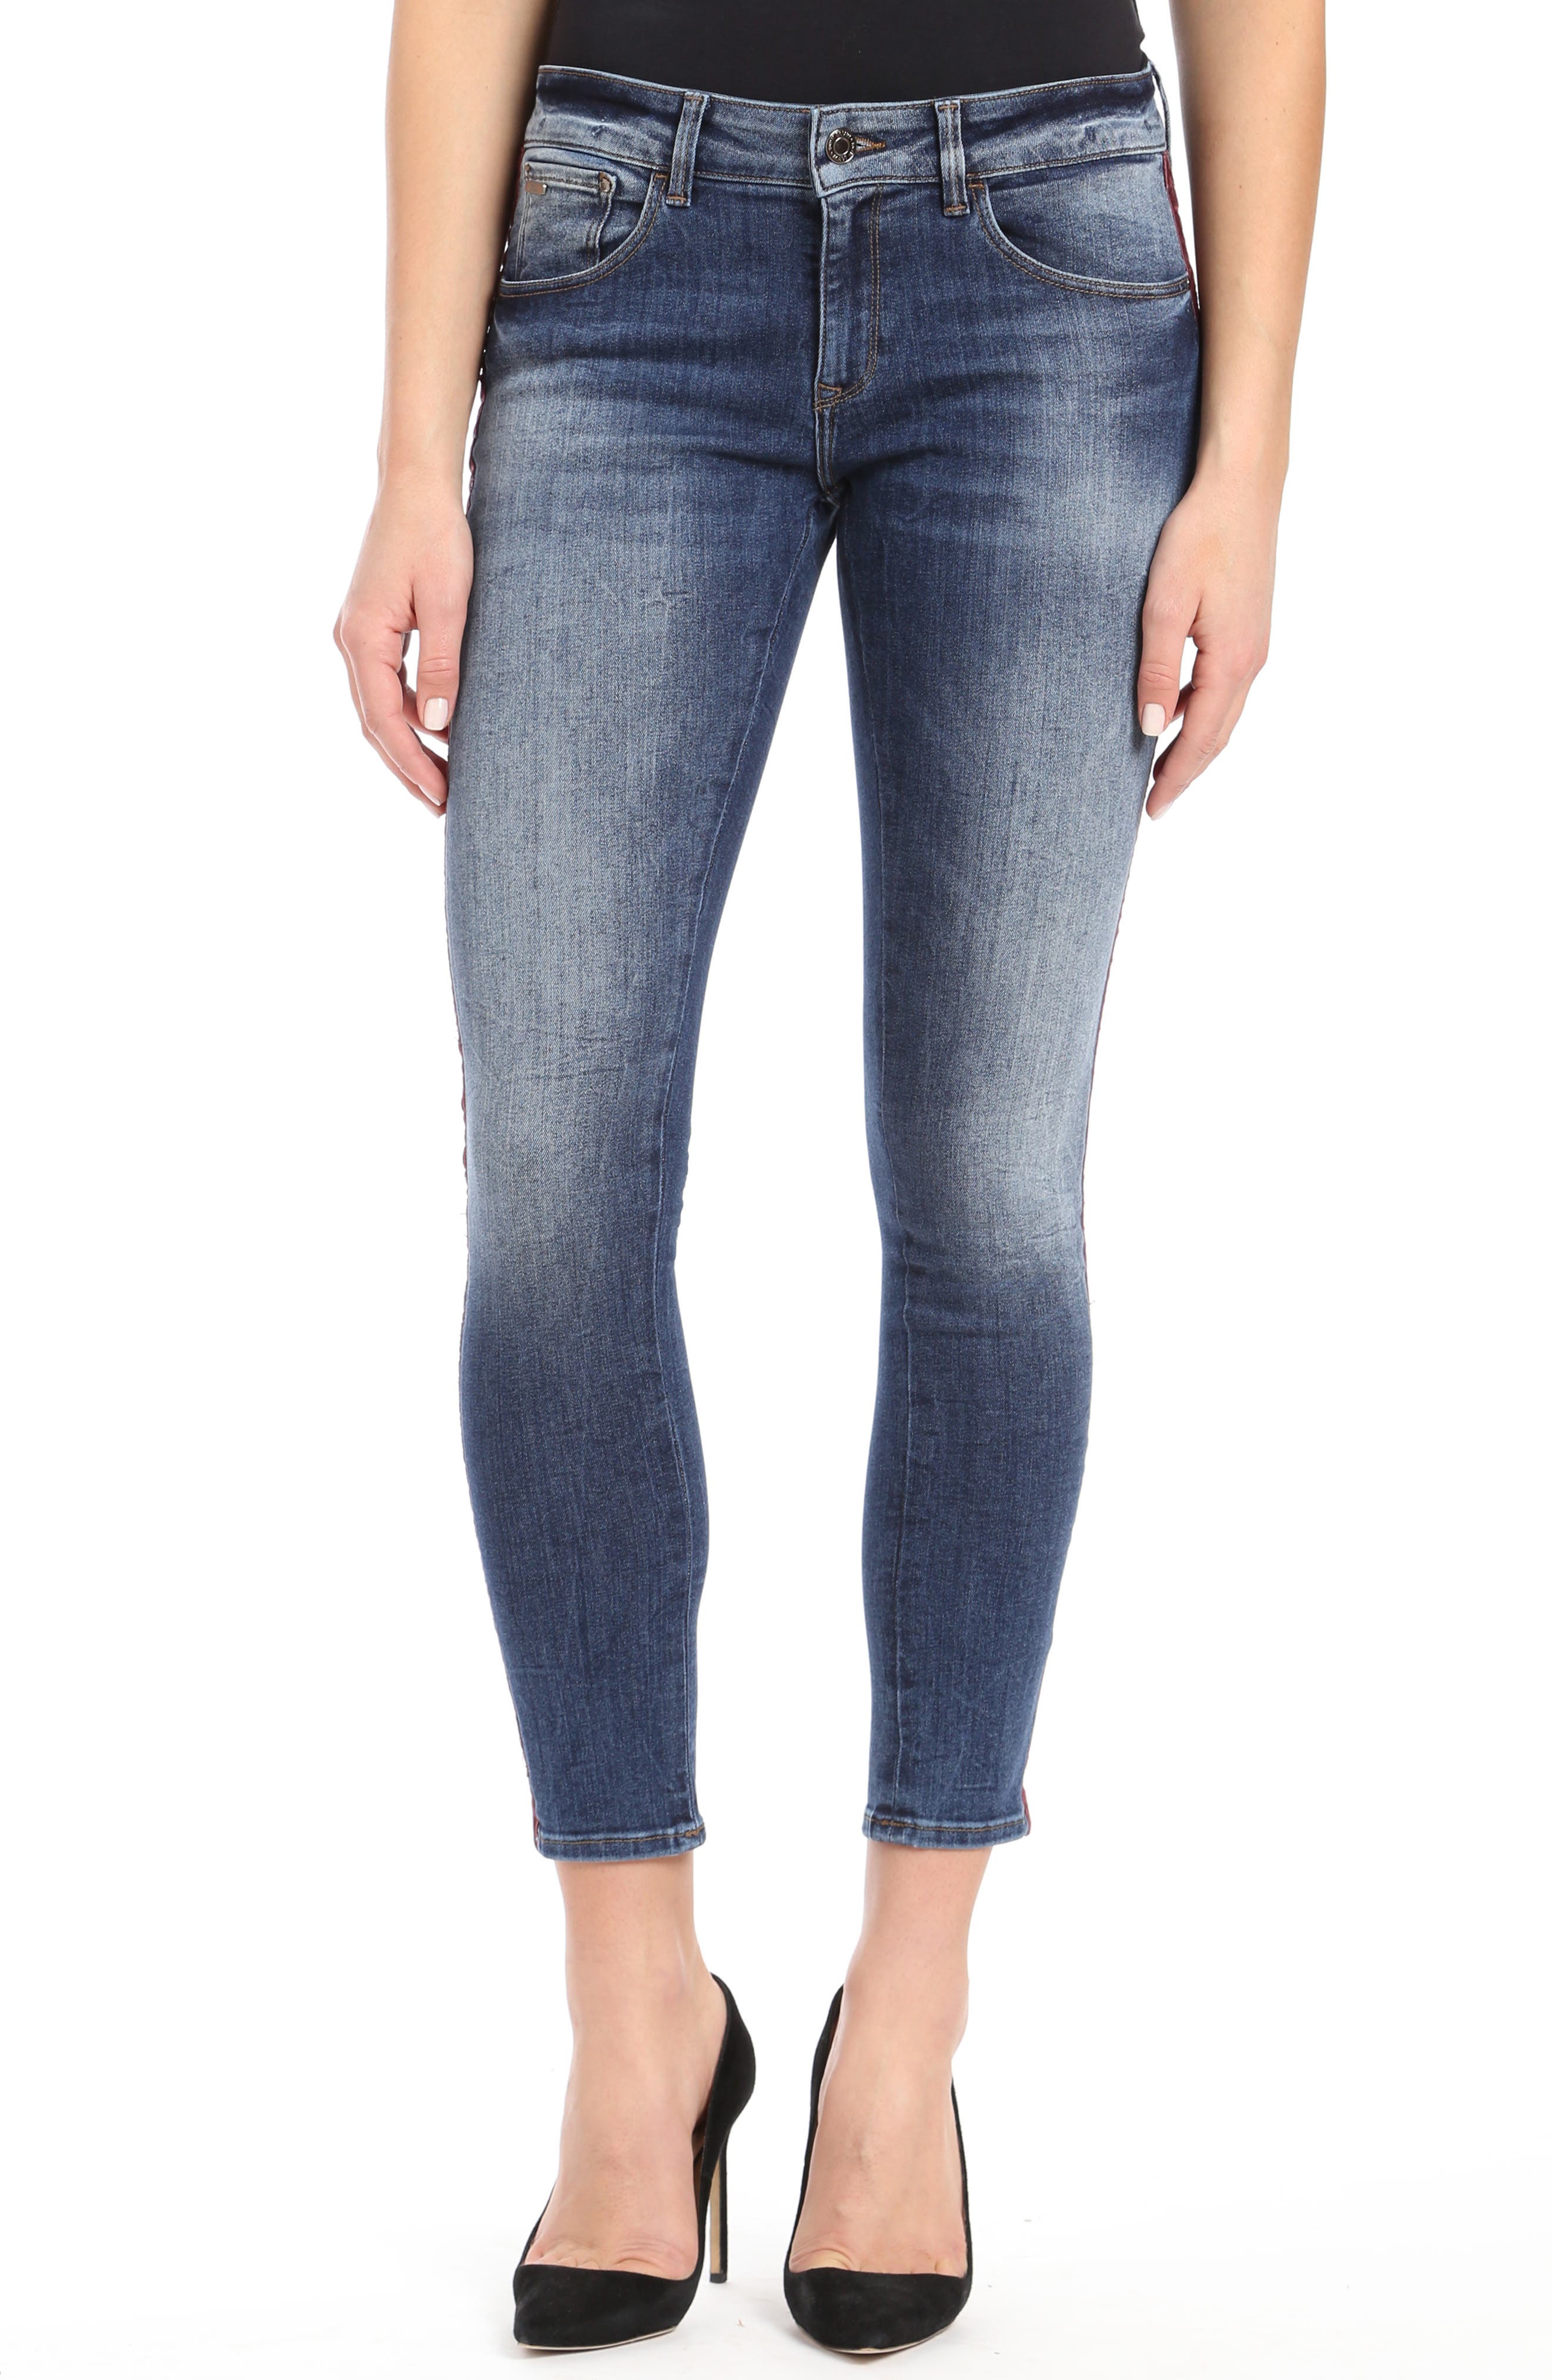 Women's Jeans $80 to $90